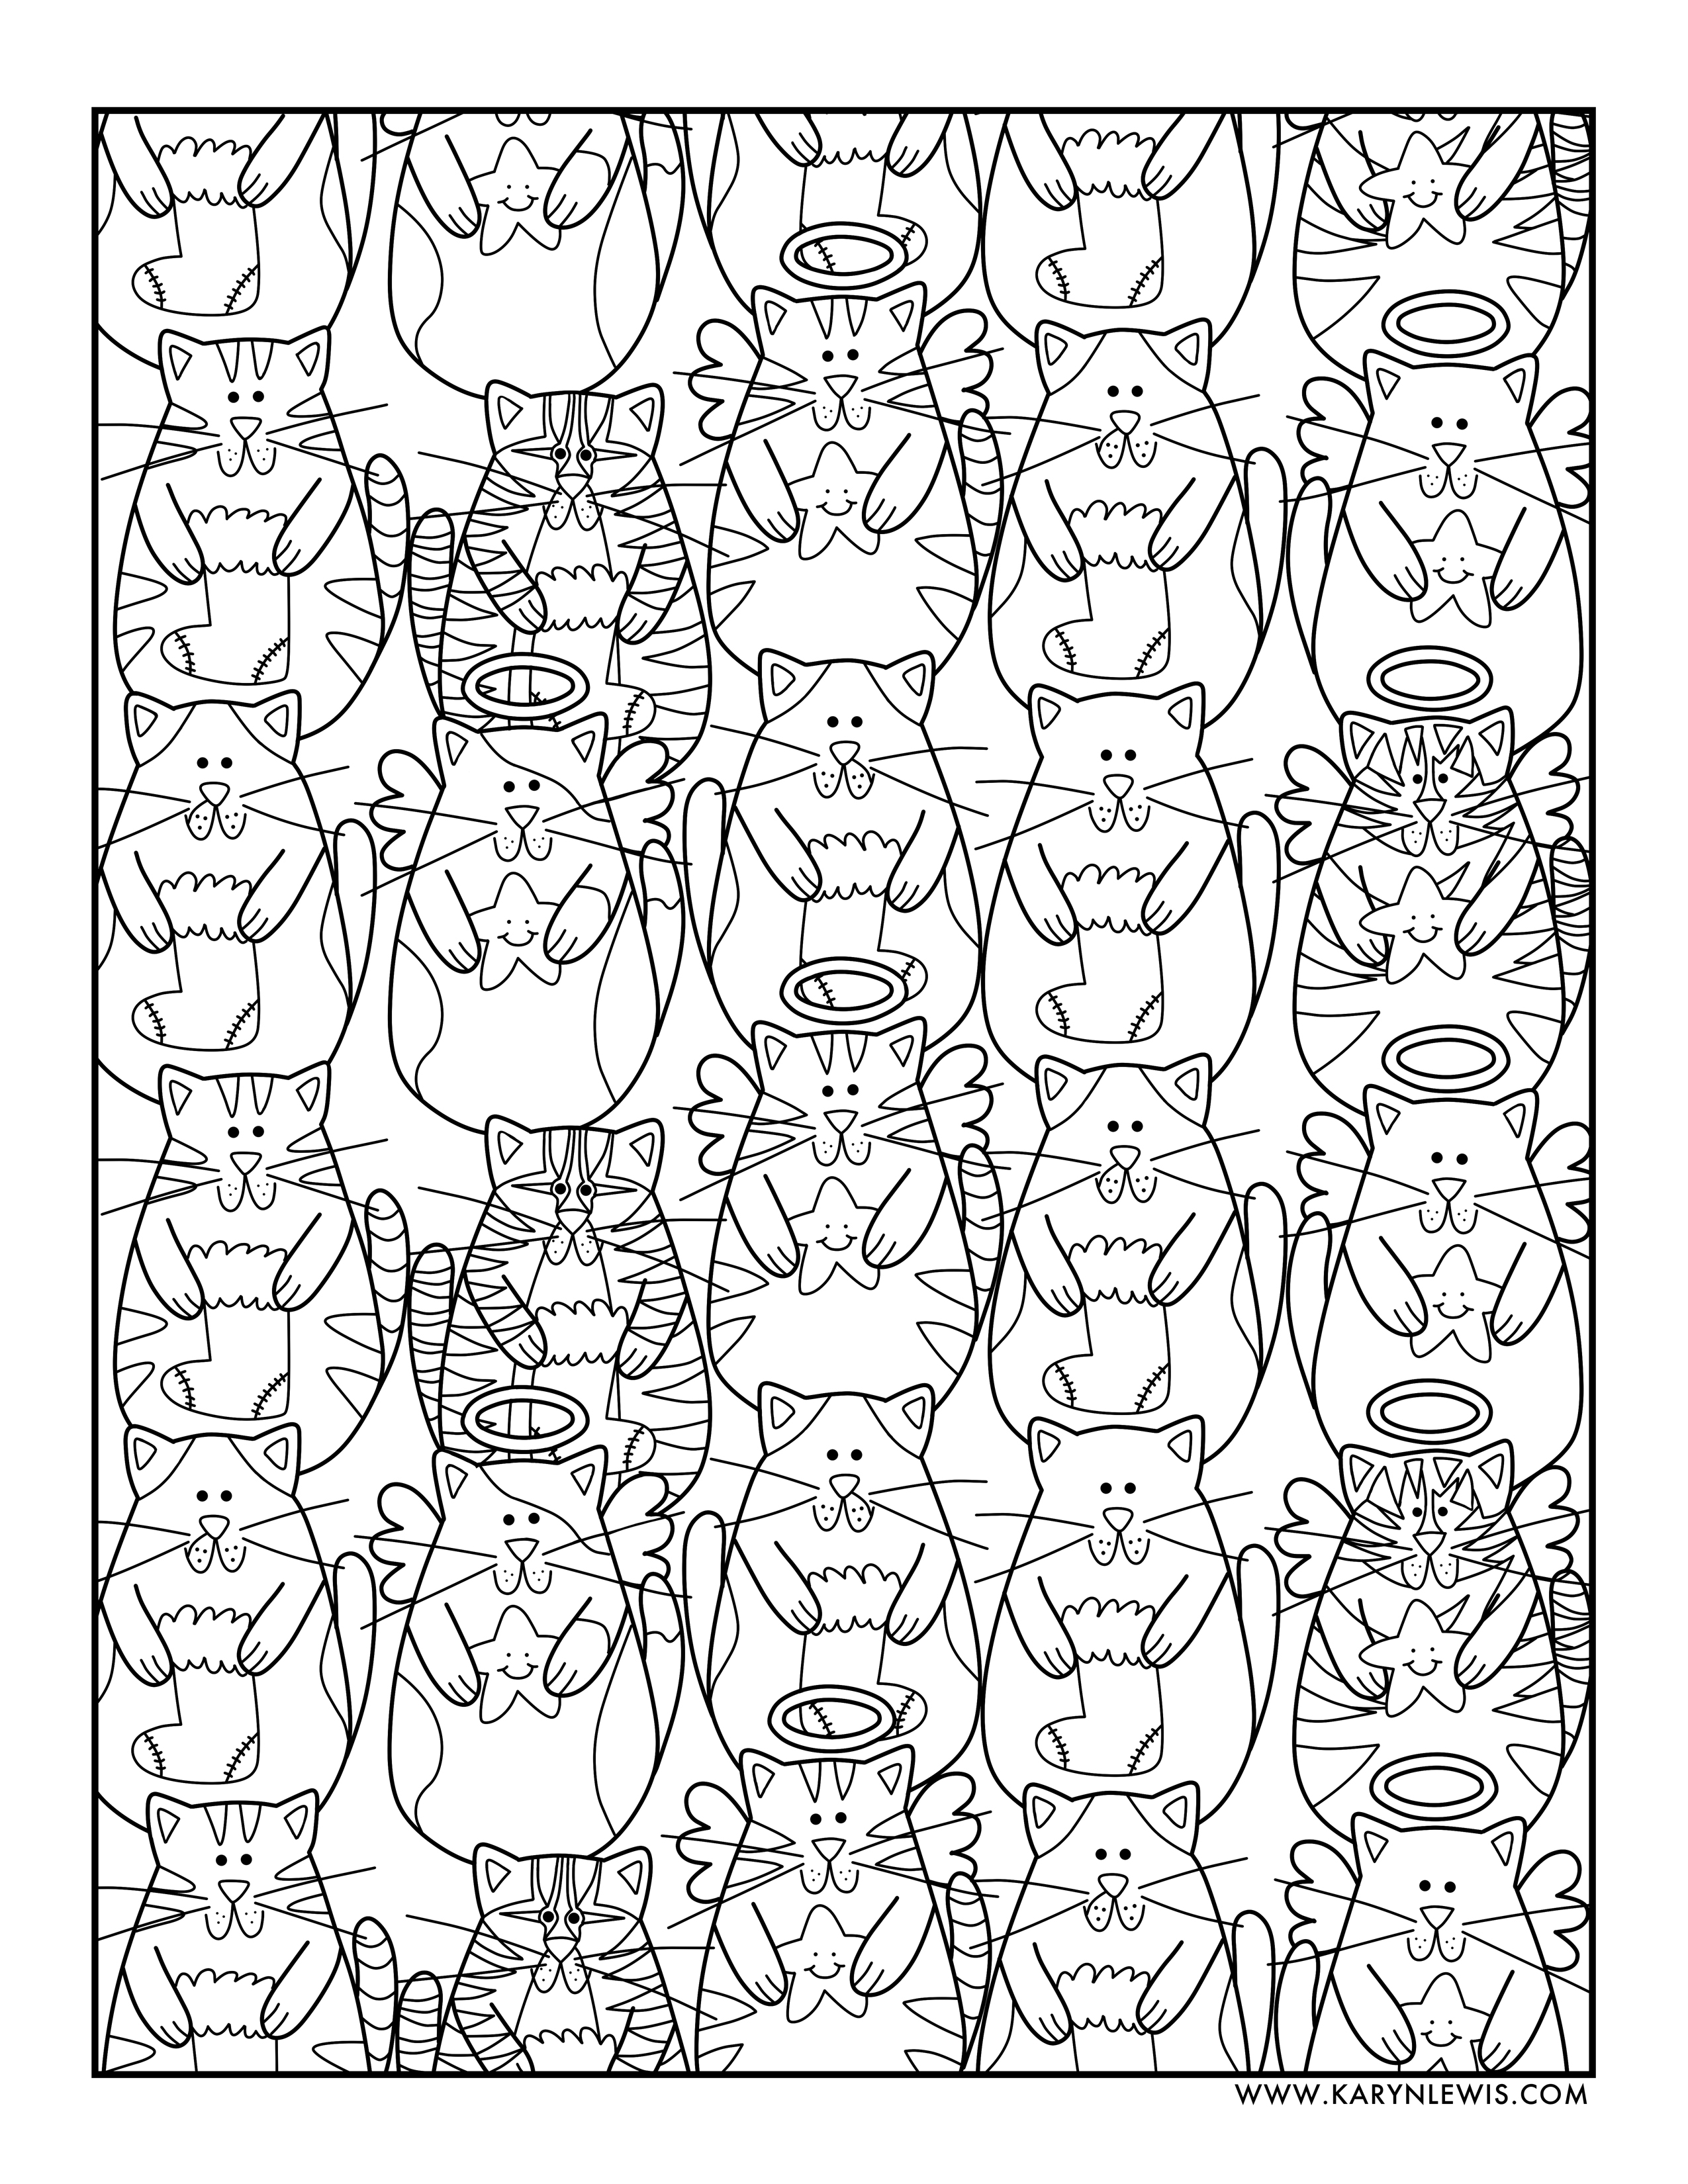 Christmas Cats Free Adult Coloring Page | Karyn Lewis Illustration